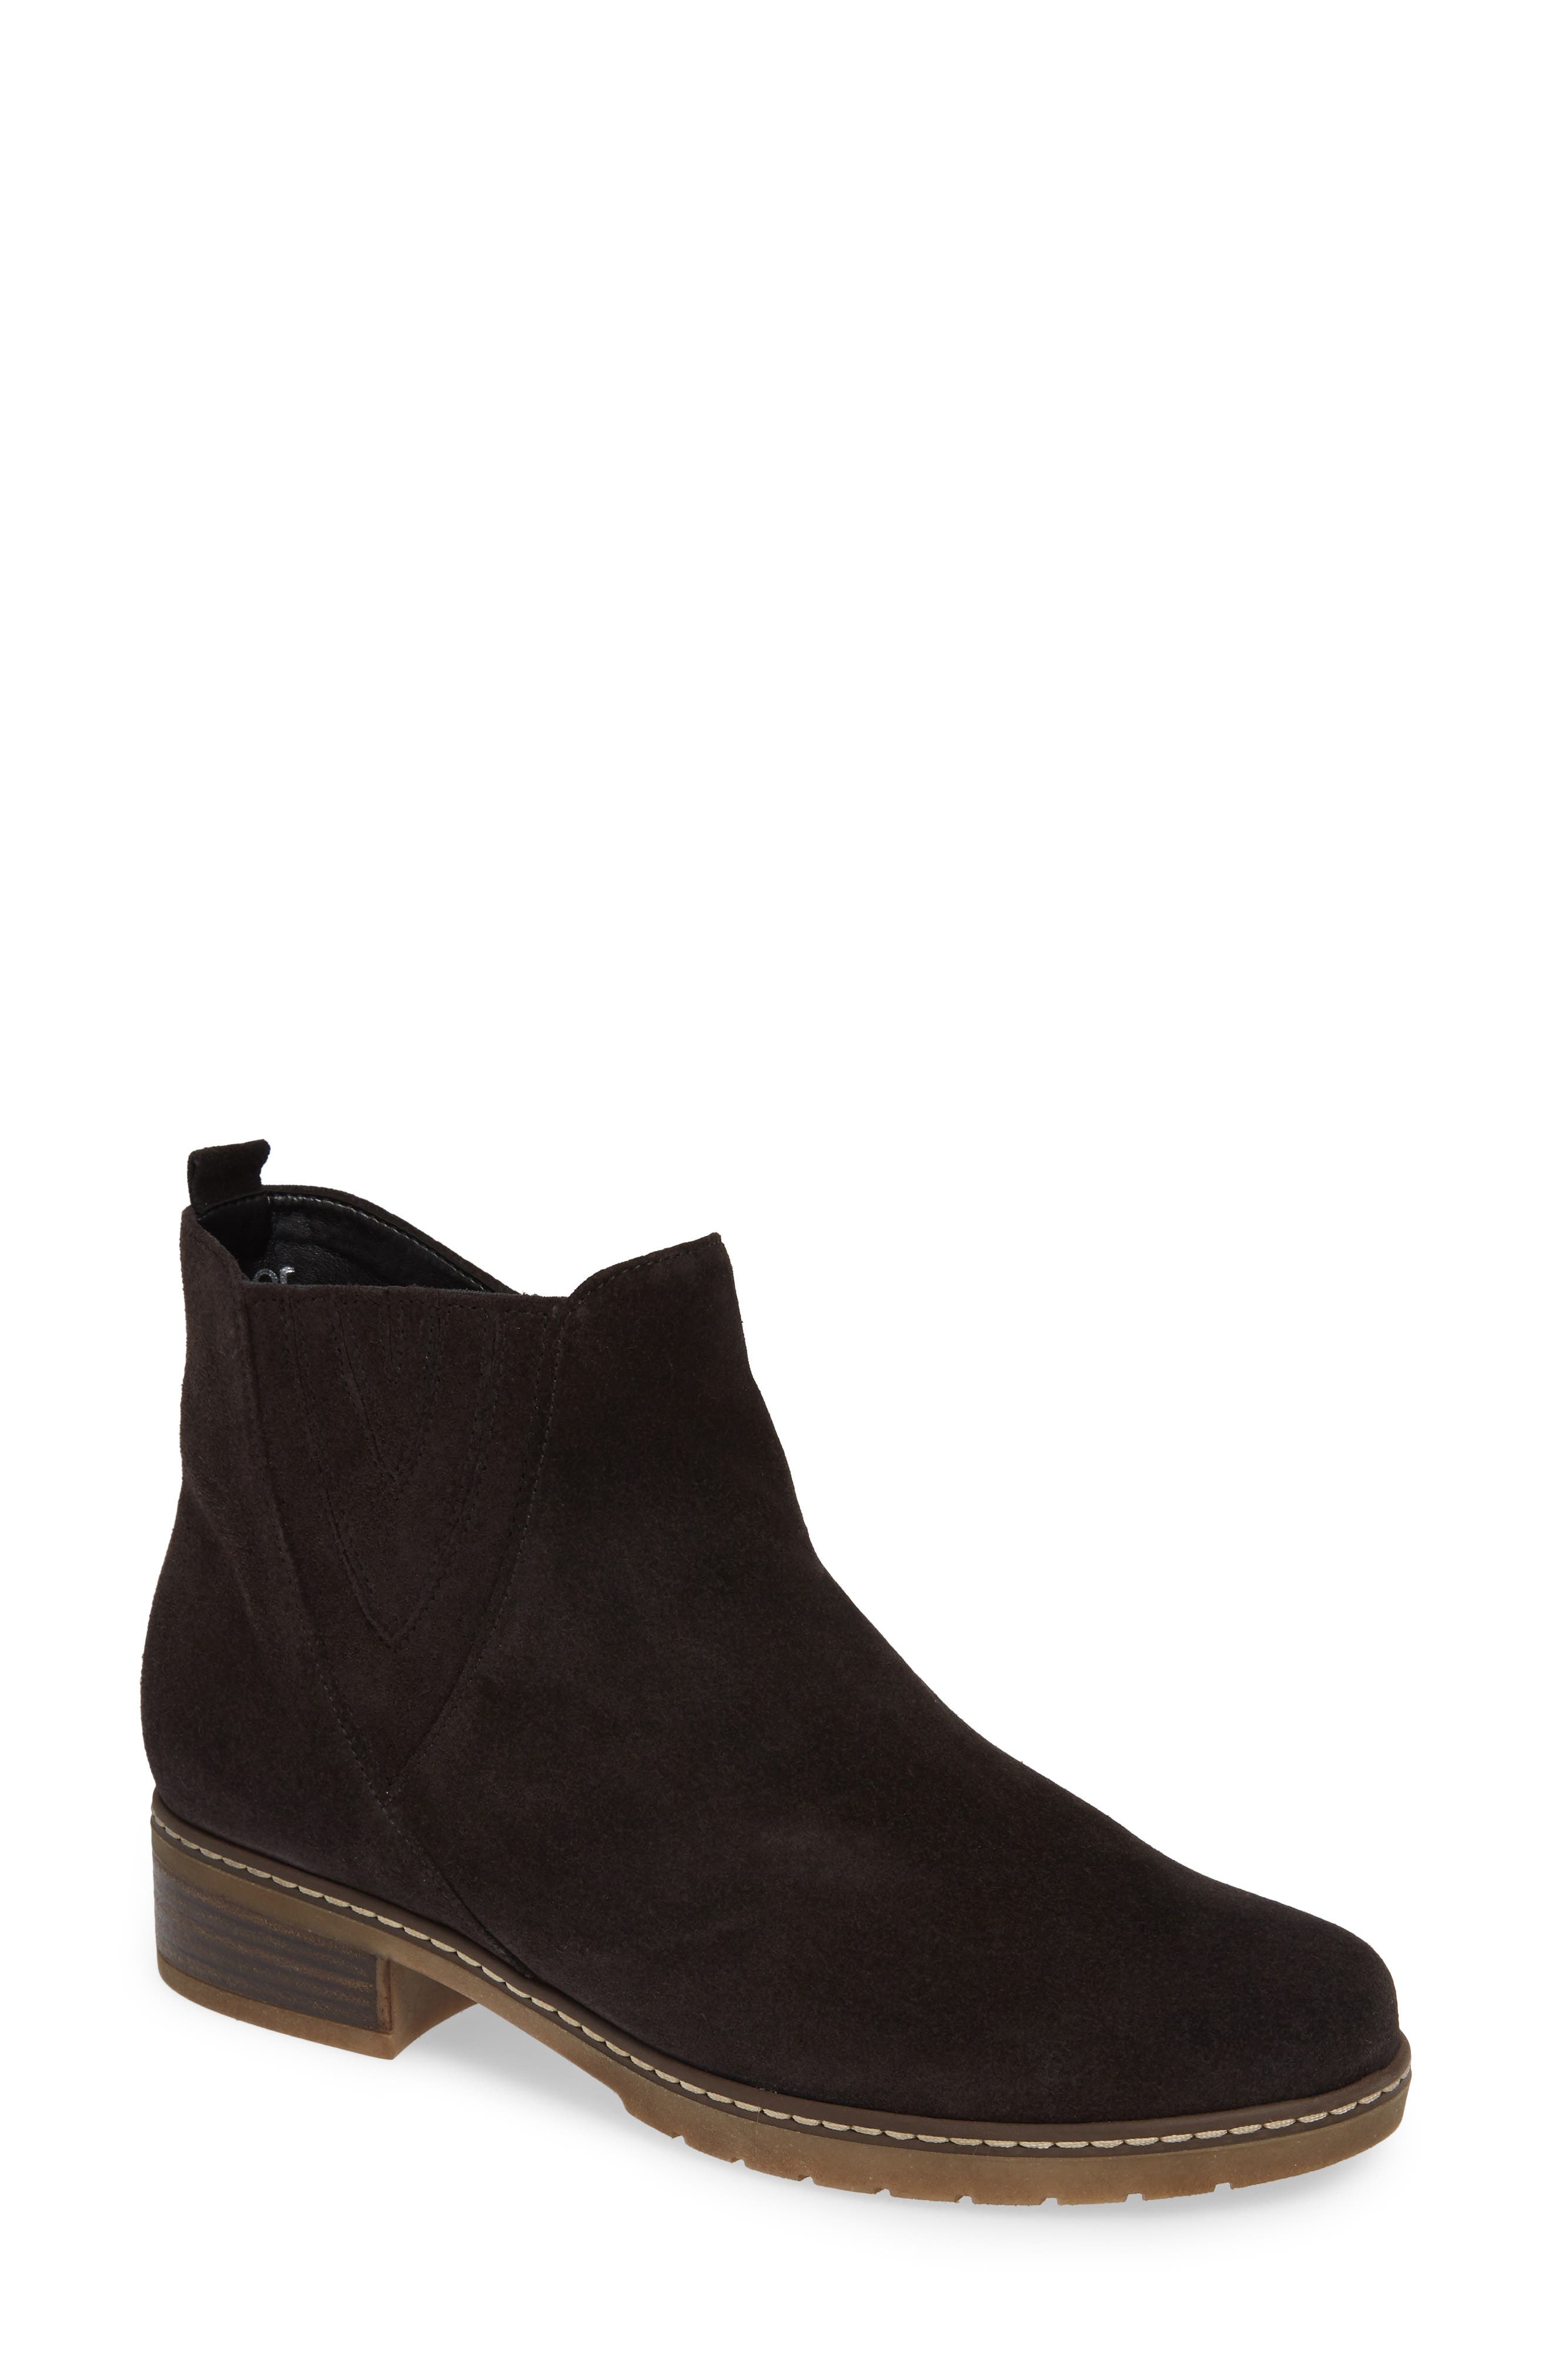 gabor suede boots womens